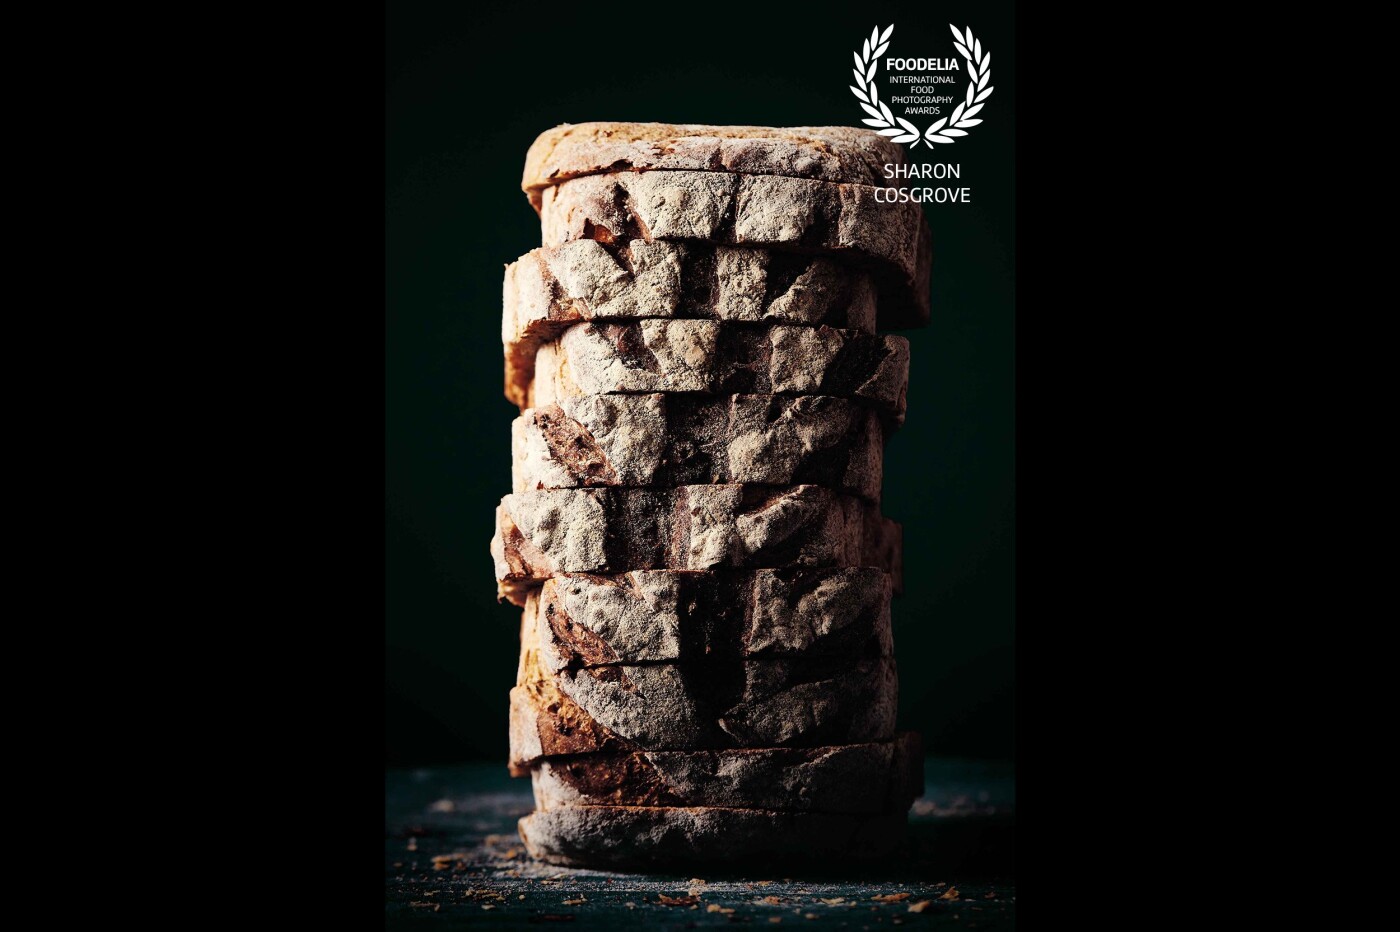 I loved how textured this bread was and wanted to highlight that with some soft feathered lighting but keep a dark moody feel to the shot.